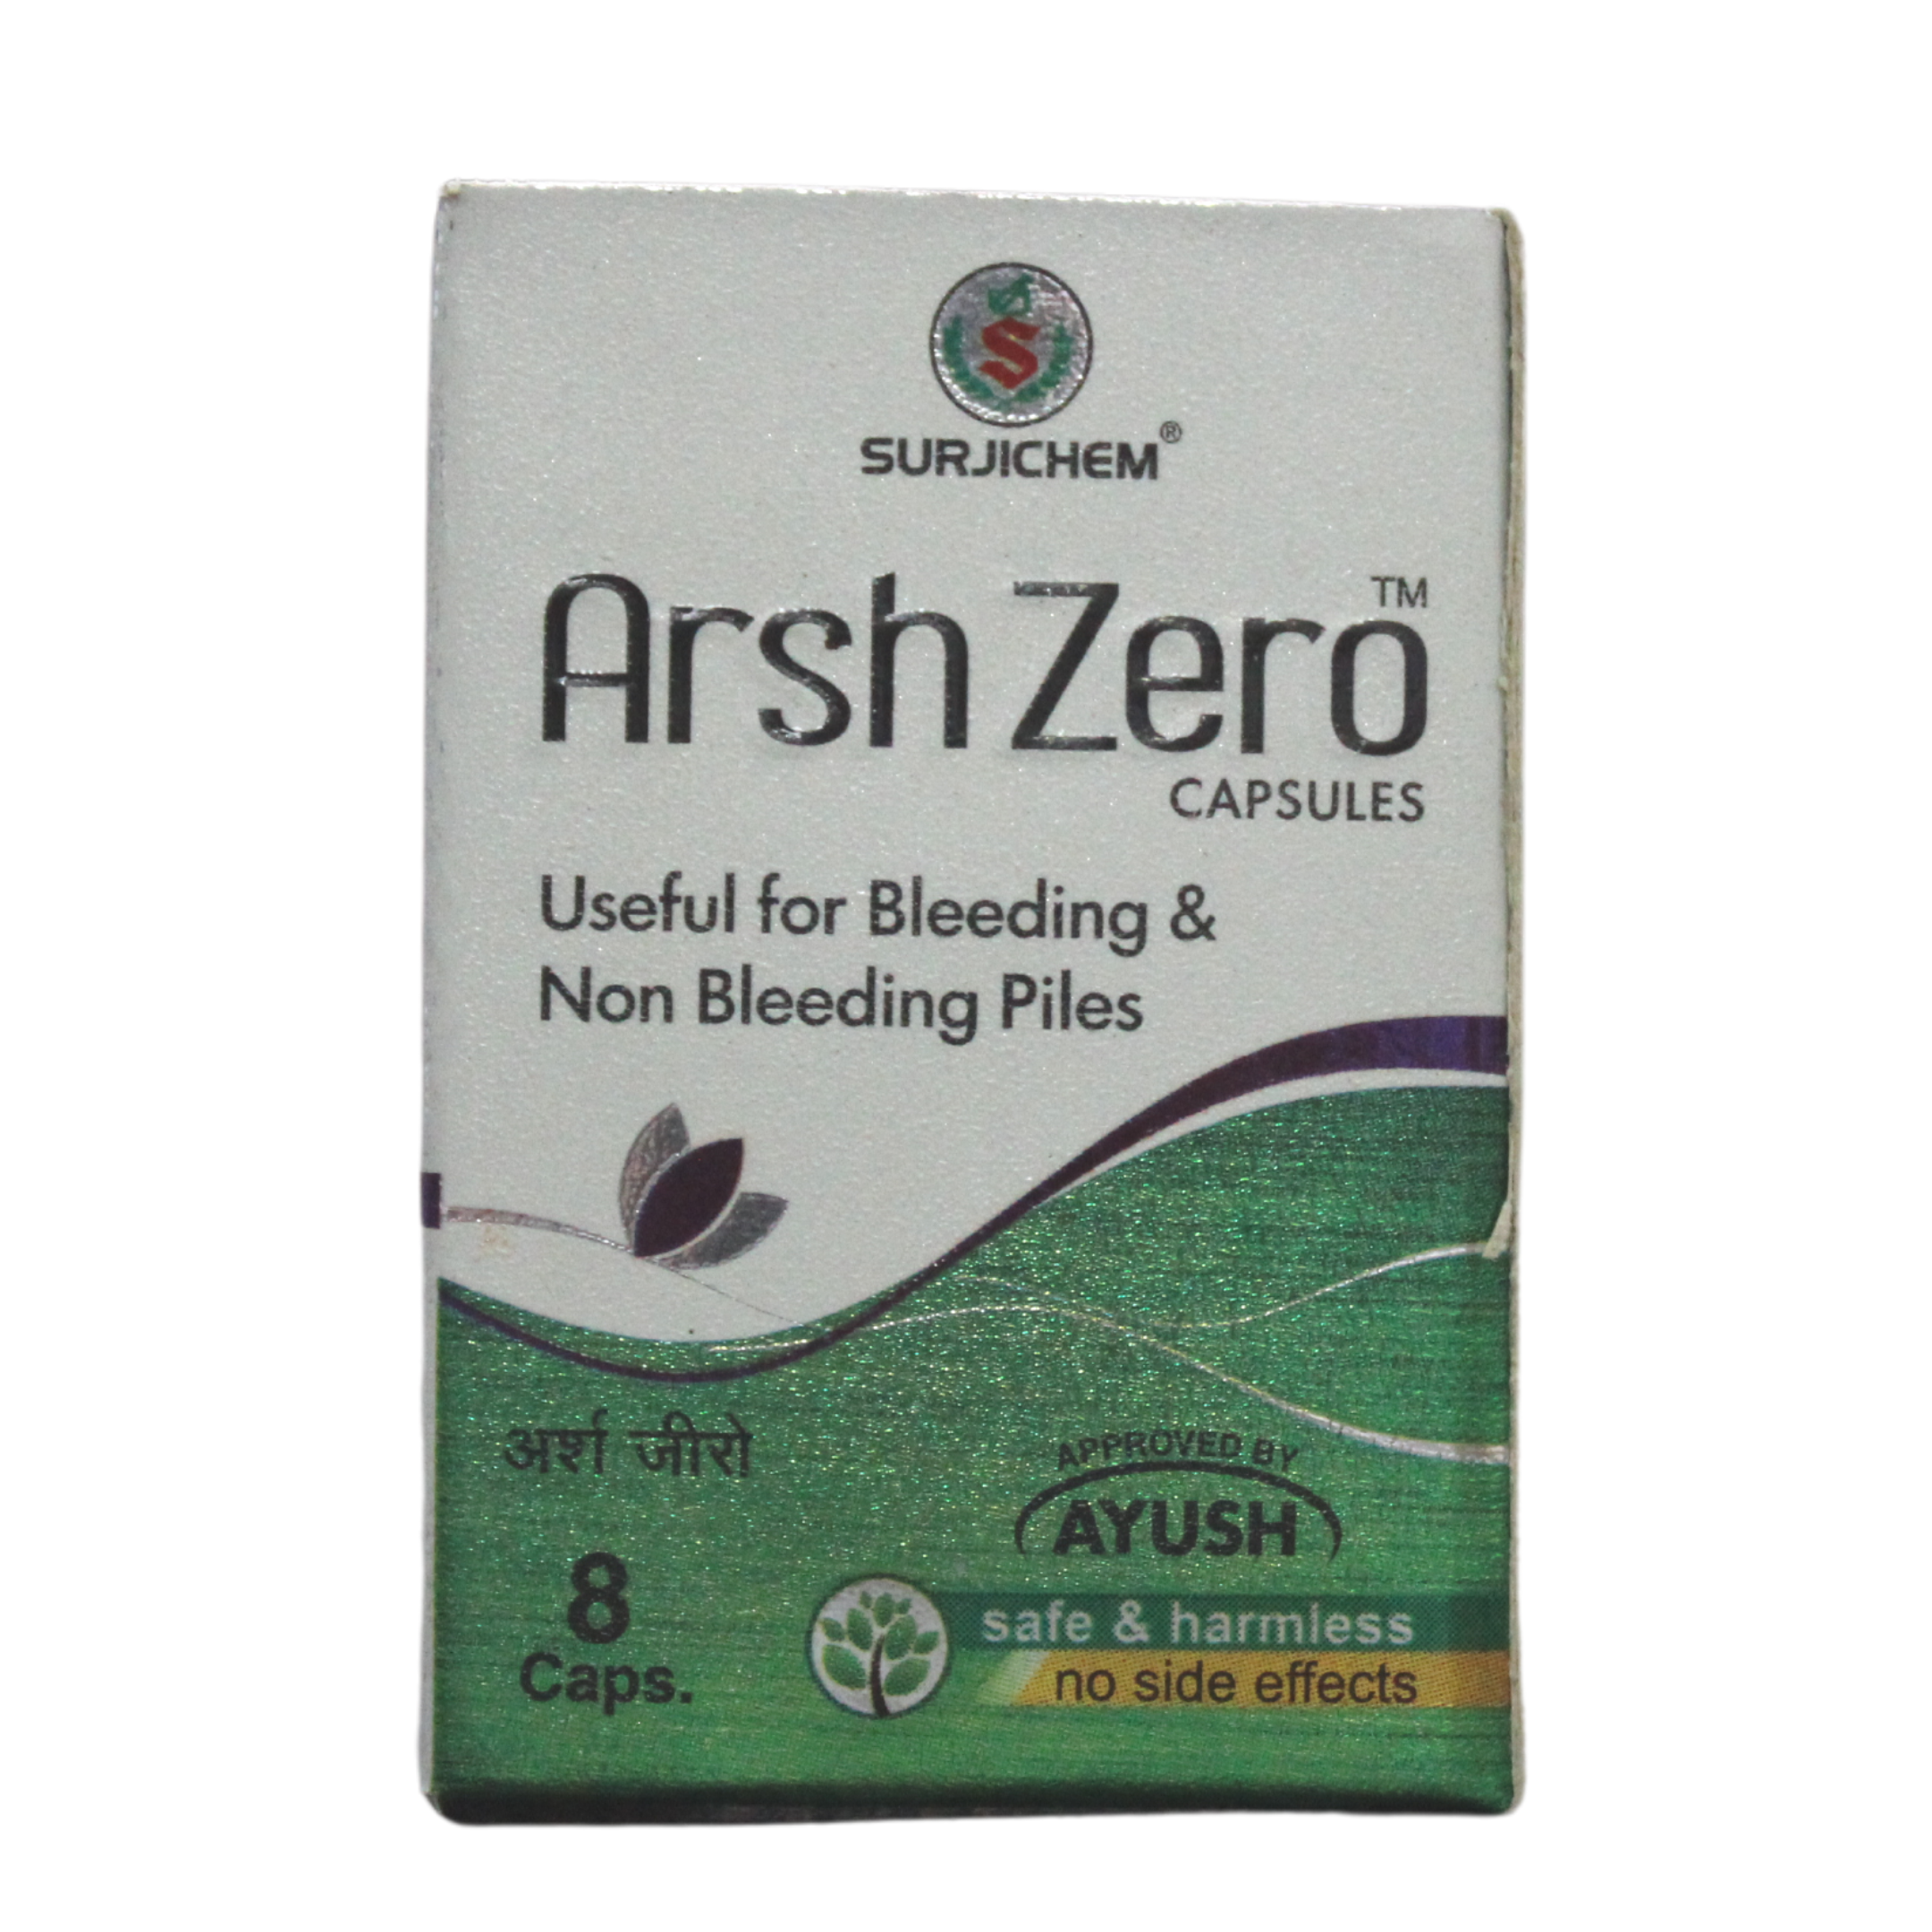 Shop Arshzero Capsules - 8 Capsules at price 80.00 from Surjichem Online - Ayush Care